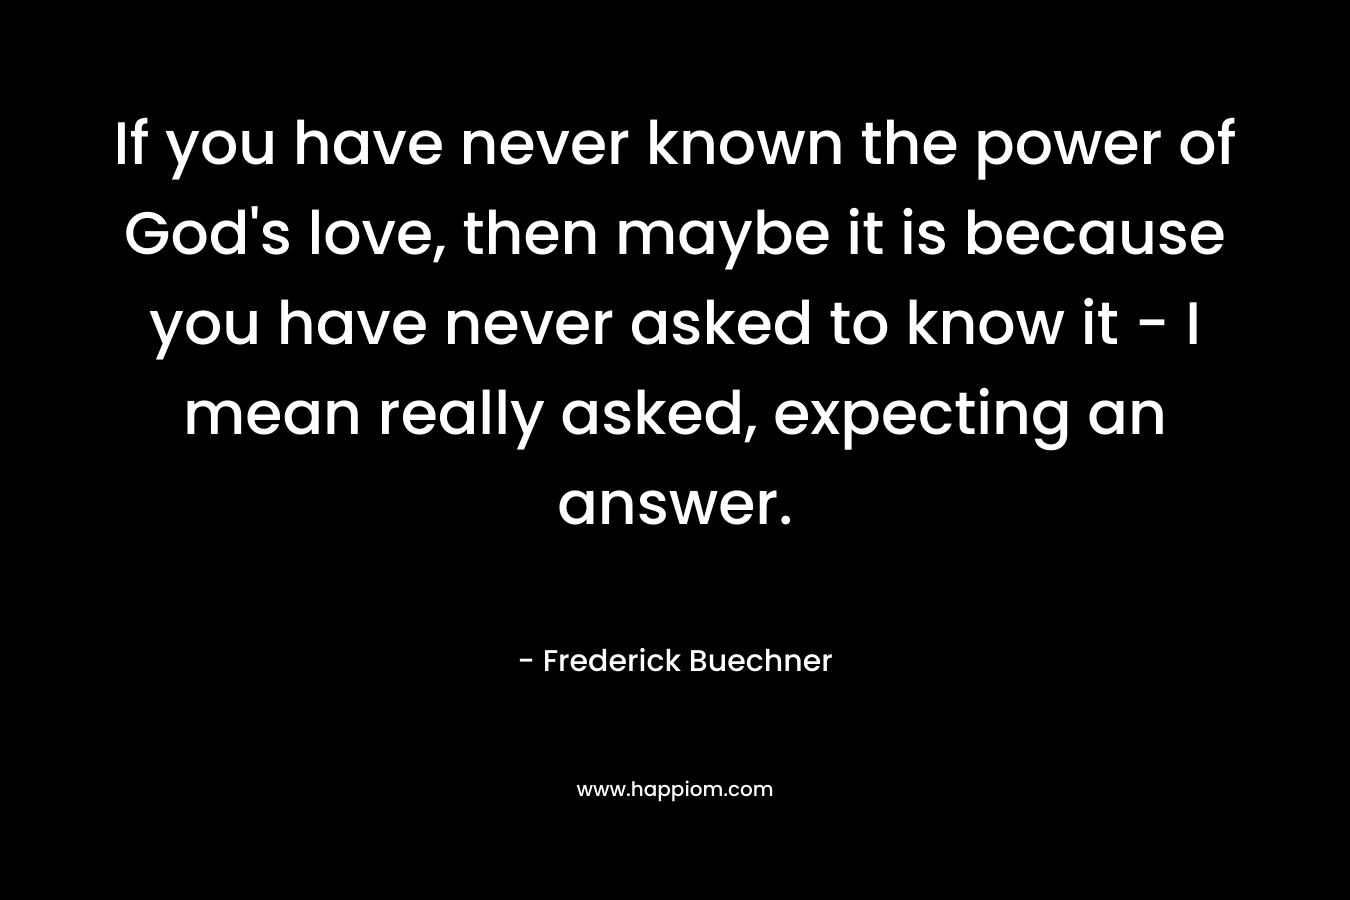 If you have never known the power of God's love, then maybe it is because you have never asked to know it - I mean really asked, expecting an answer.